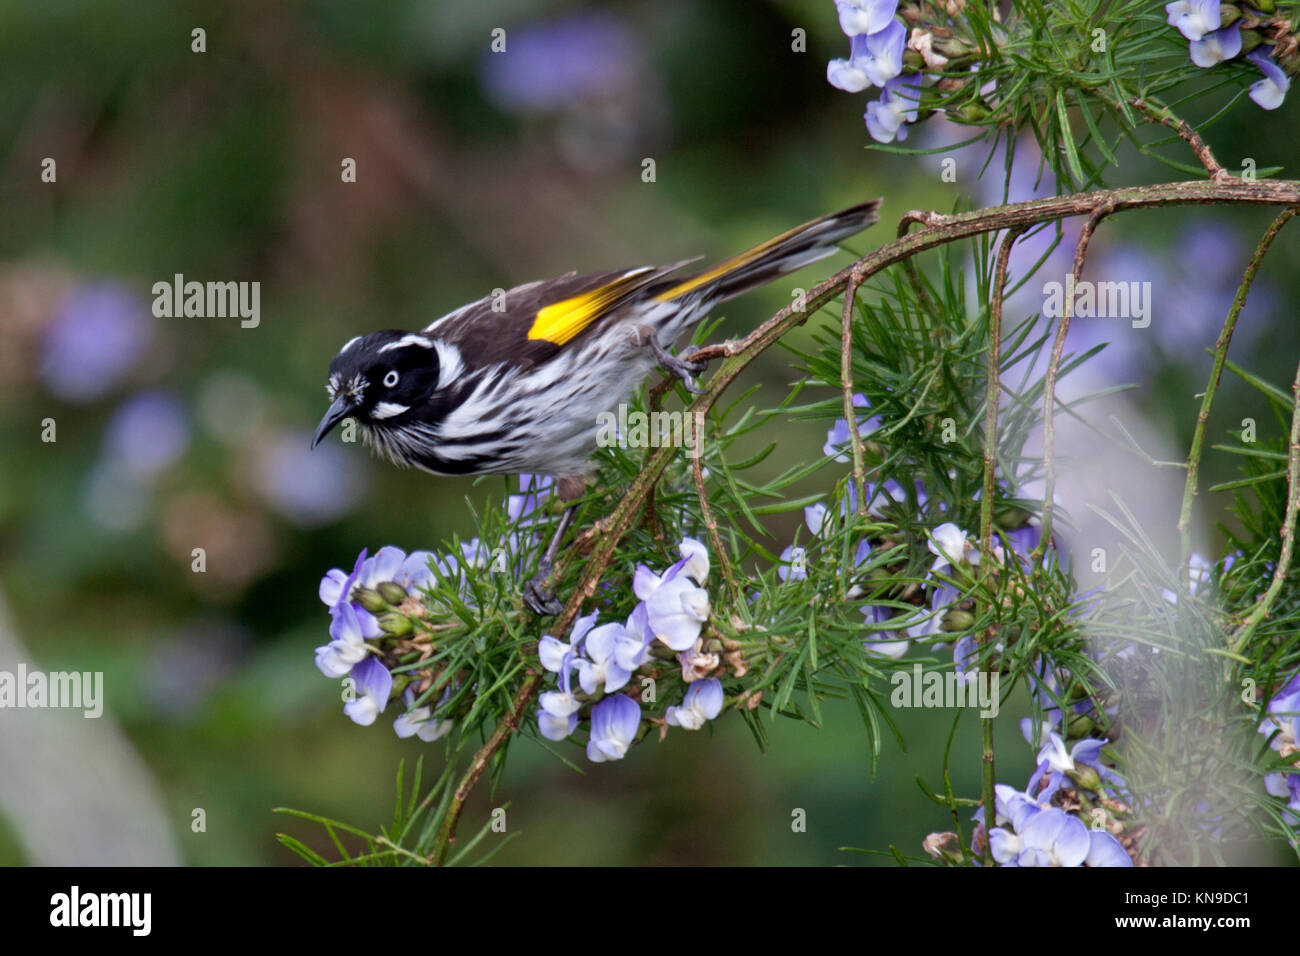 New holland honeyeater visiting flowering shrub to feed on nectar and insects in Victoria Australia Stock Photo